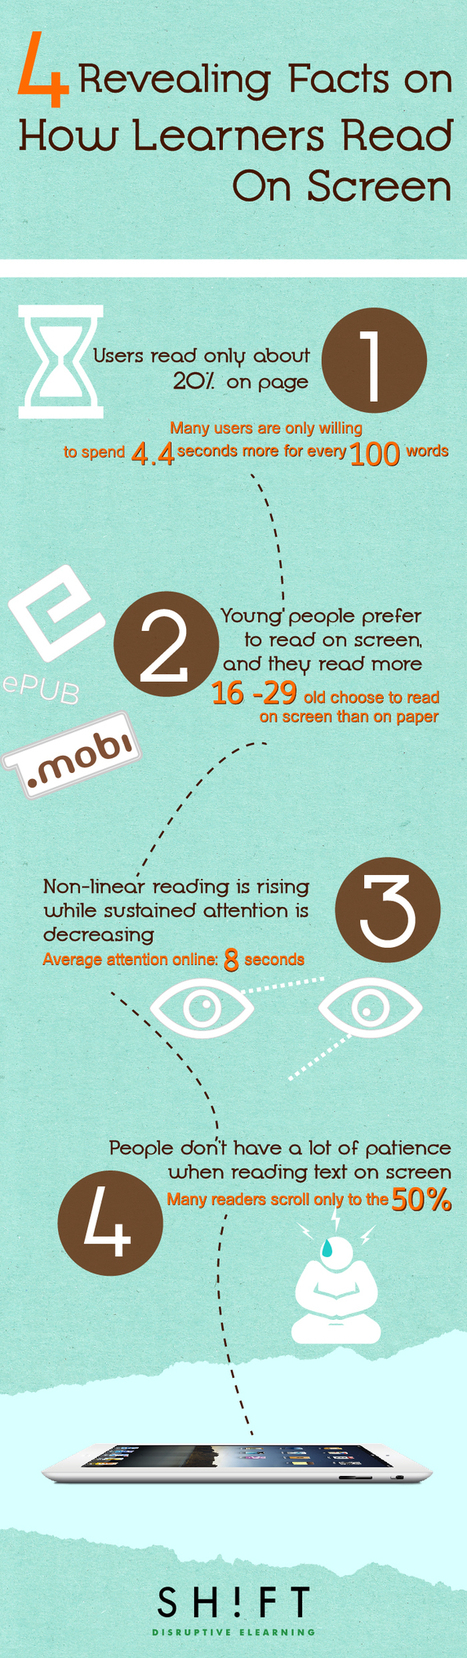 Four Revealing Facts on How Learners Read On Screen [Infographic] | Information and digital literacy in education via the digital path | Scoop.it